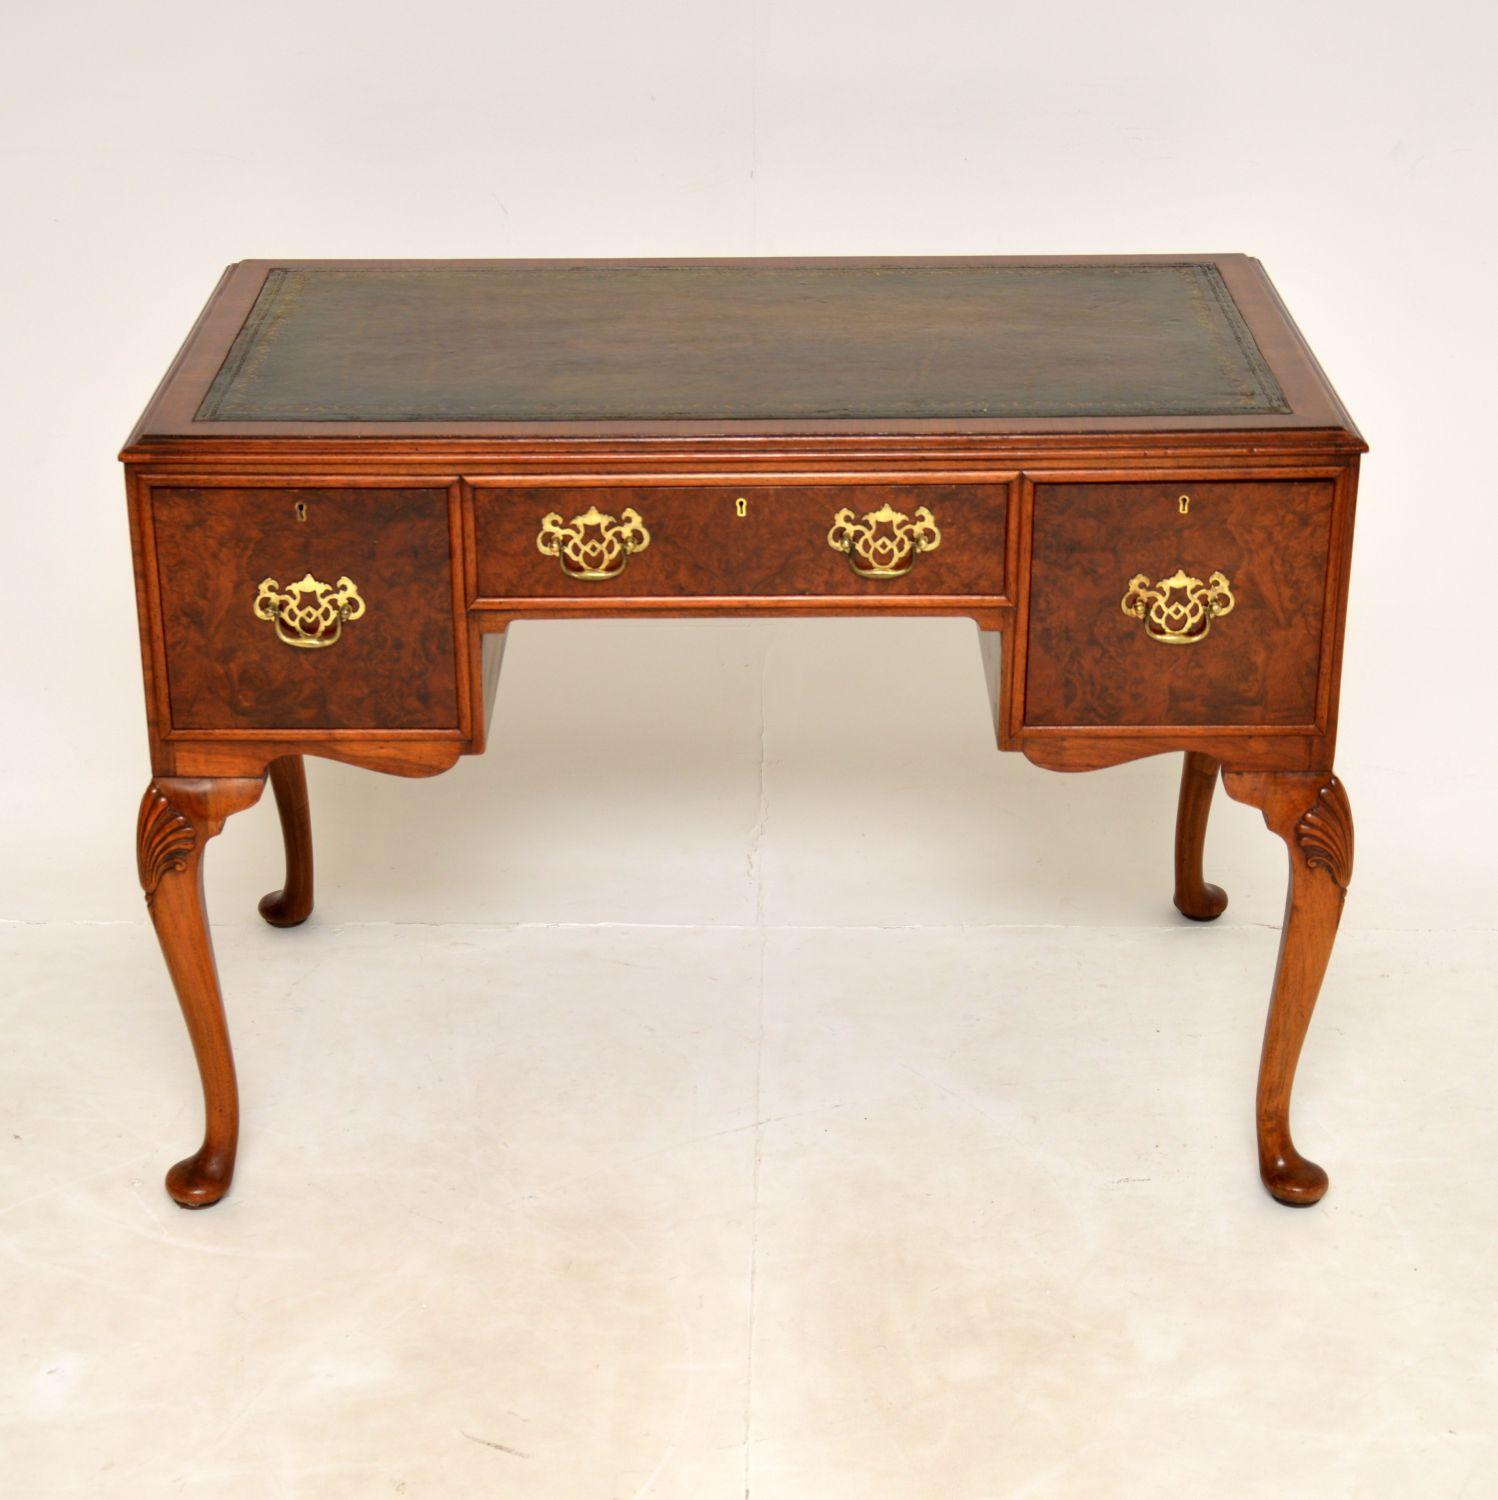 A beautiful antique Edwardian leather top desk in burr walnut. This was made in England, it dates from around the 1900-1910 period.
It is of superb quality, there are stunning burr walnut grain patterns on the front and figured walnut on the sides,